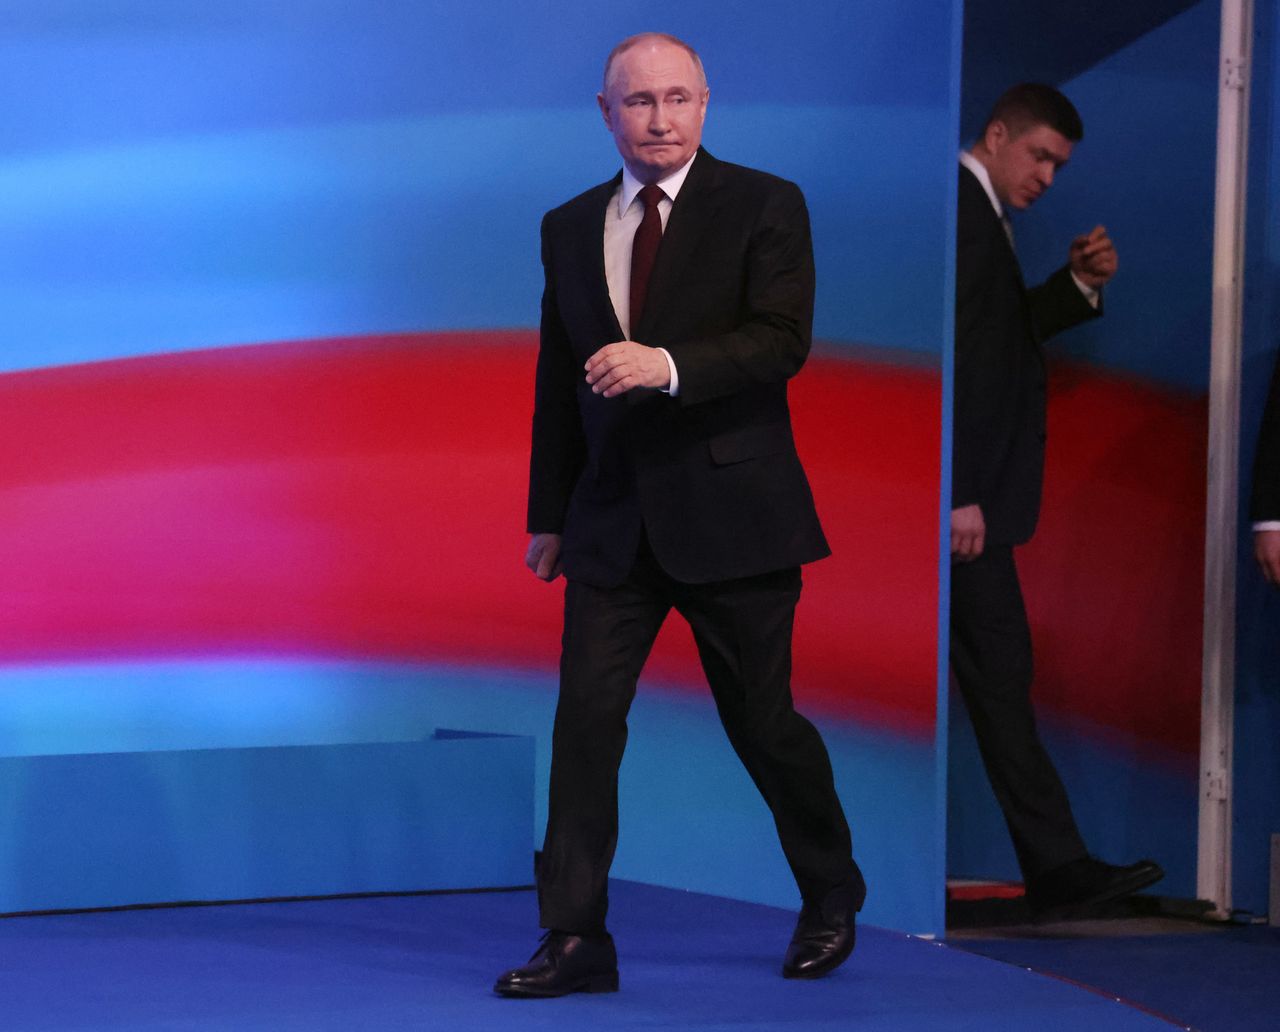 Vladimir Putin wins the presidential elections, the validity of which is not recognized by the majority of countries.